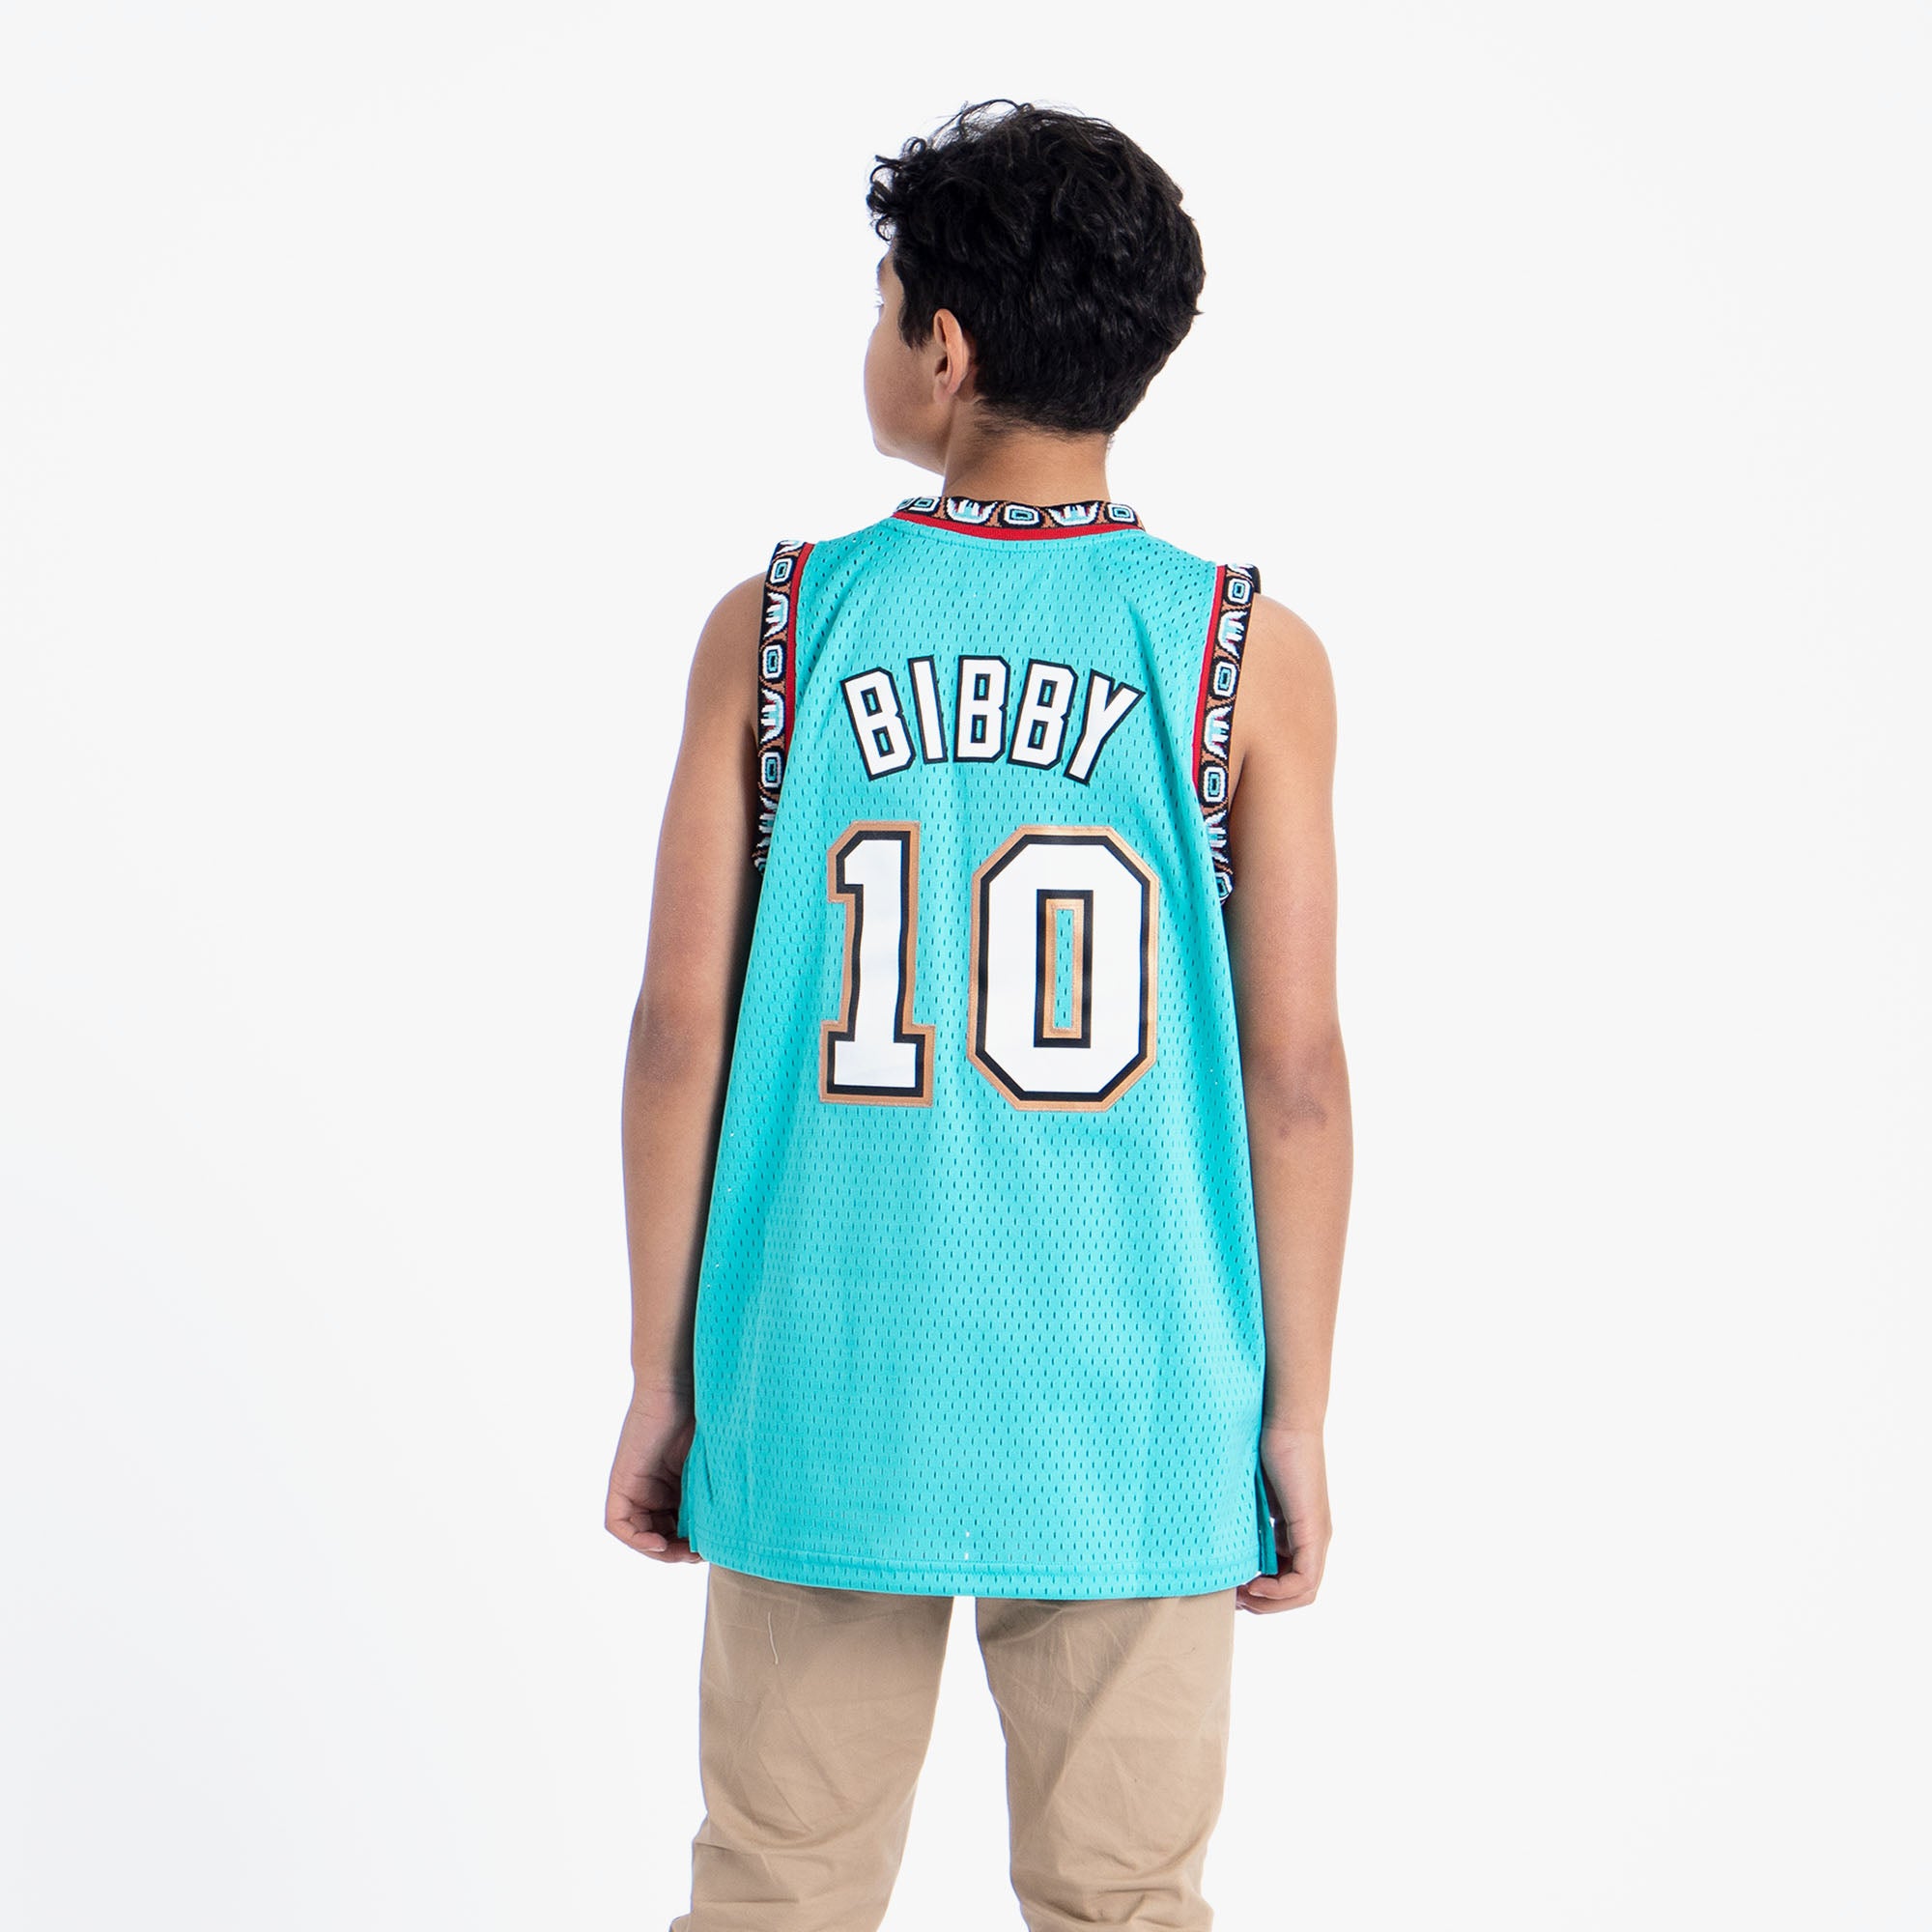 kyrie irving jersey for kids size 10-12